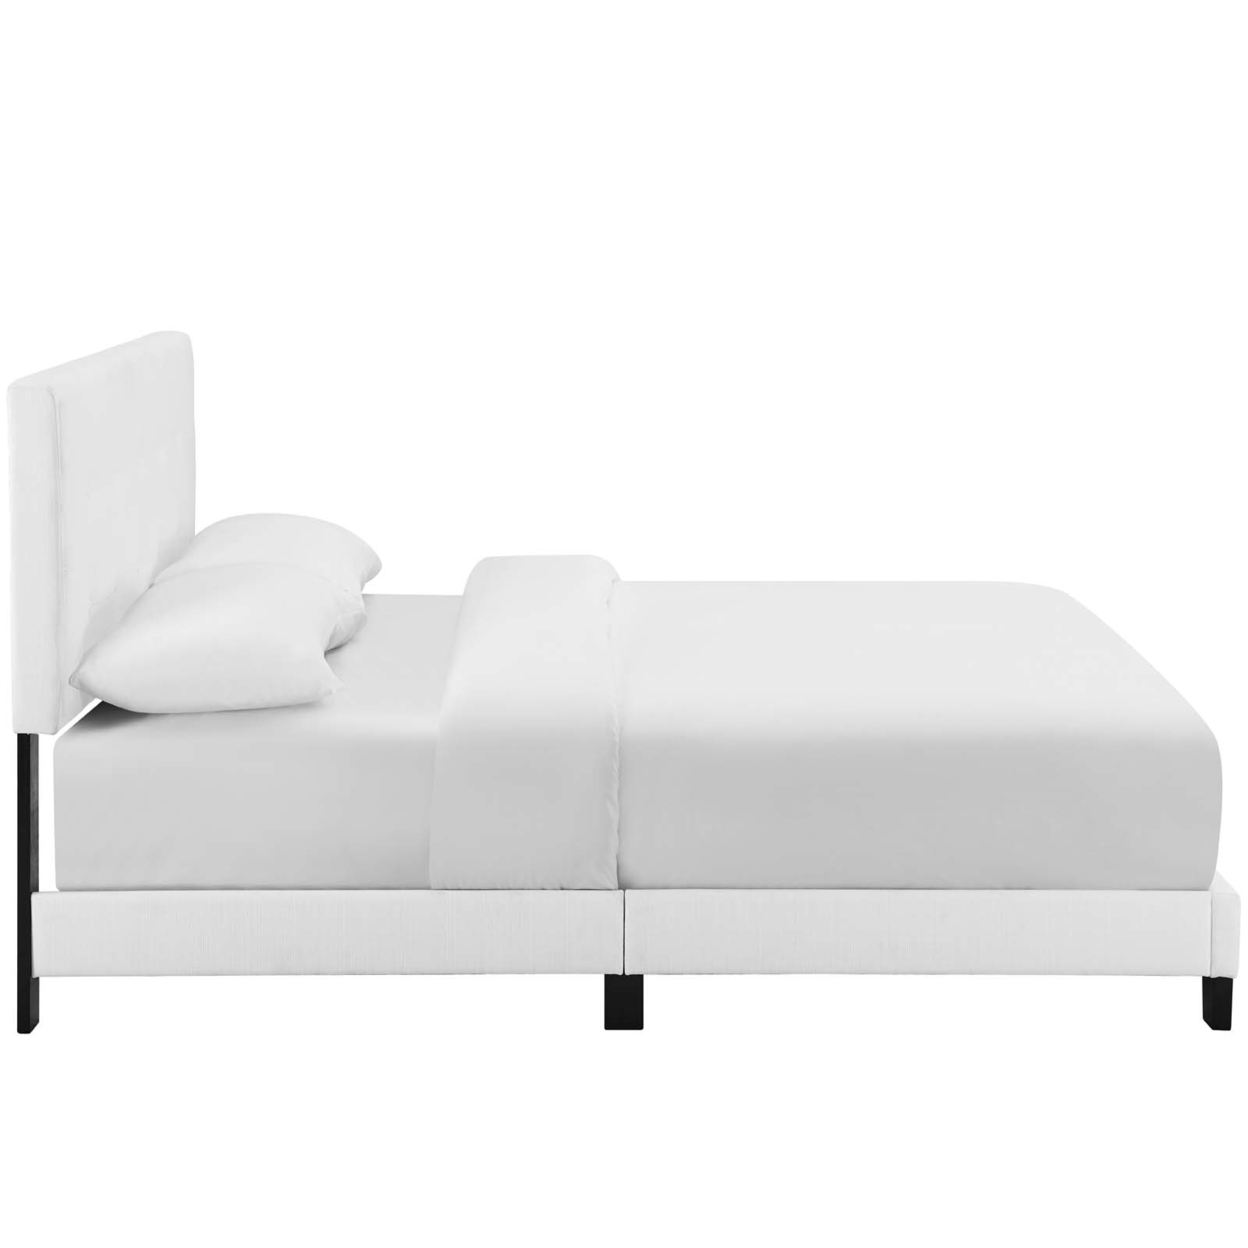 Amira King Upholstered Fabric Bed (6002-WHI)